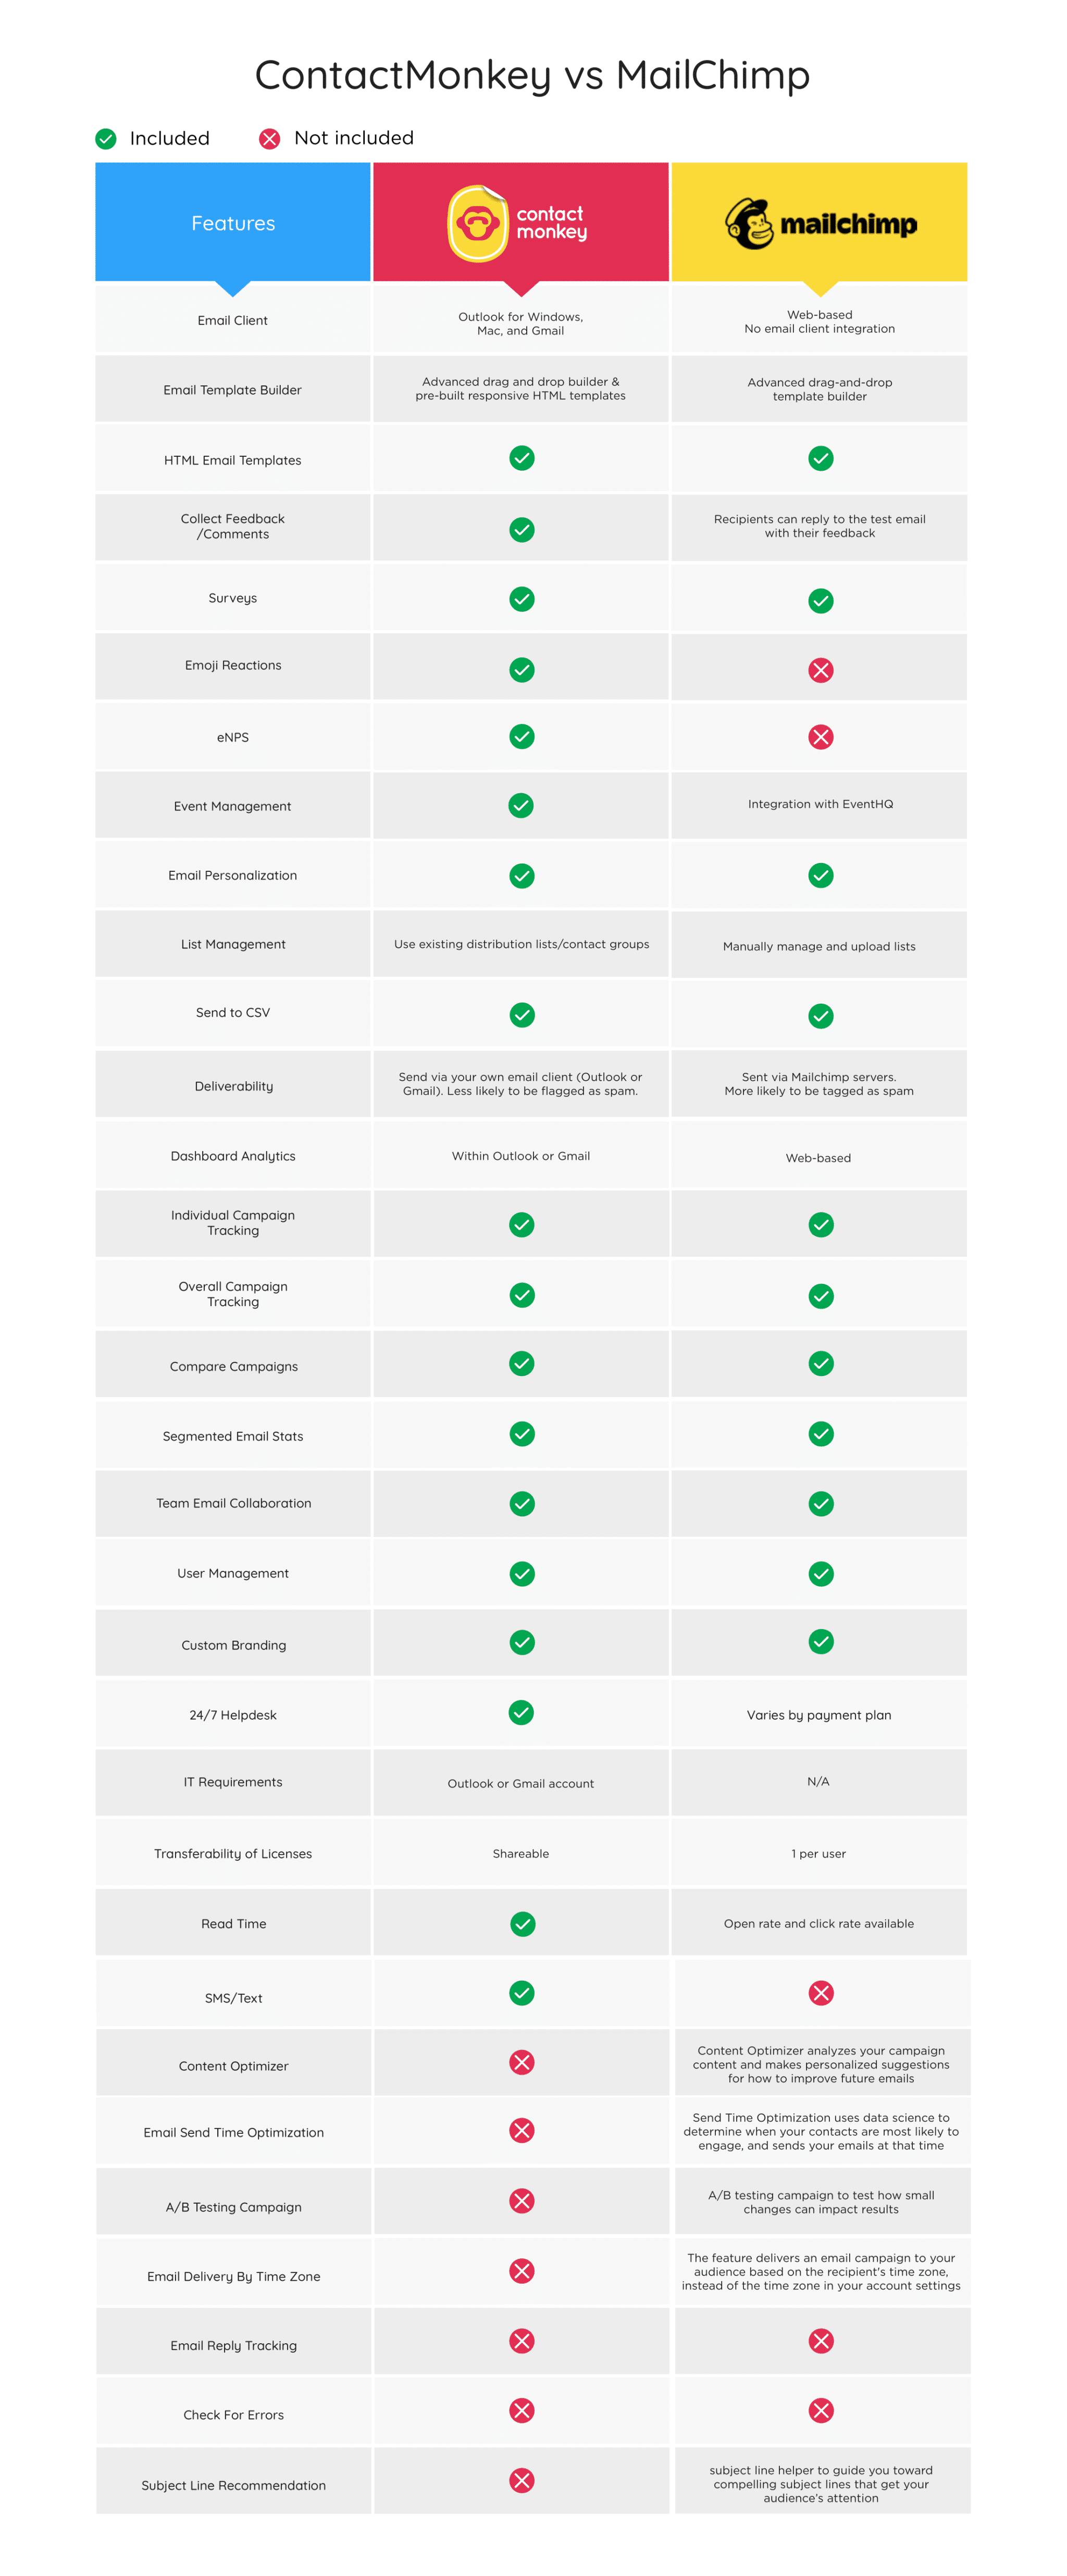 Image of comparison table breaking down the features of ContactMonkey and Mailchimp.